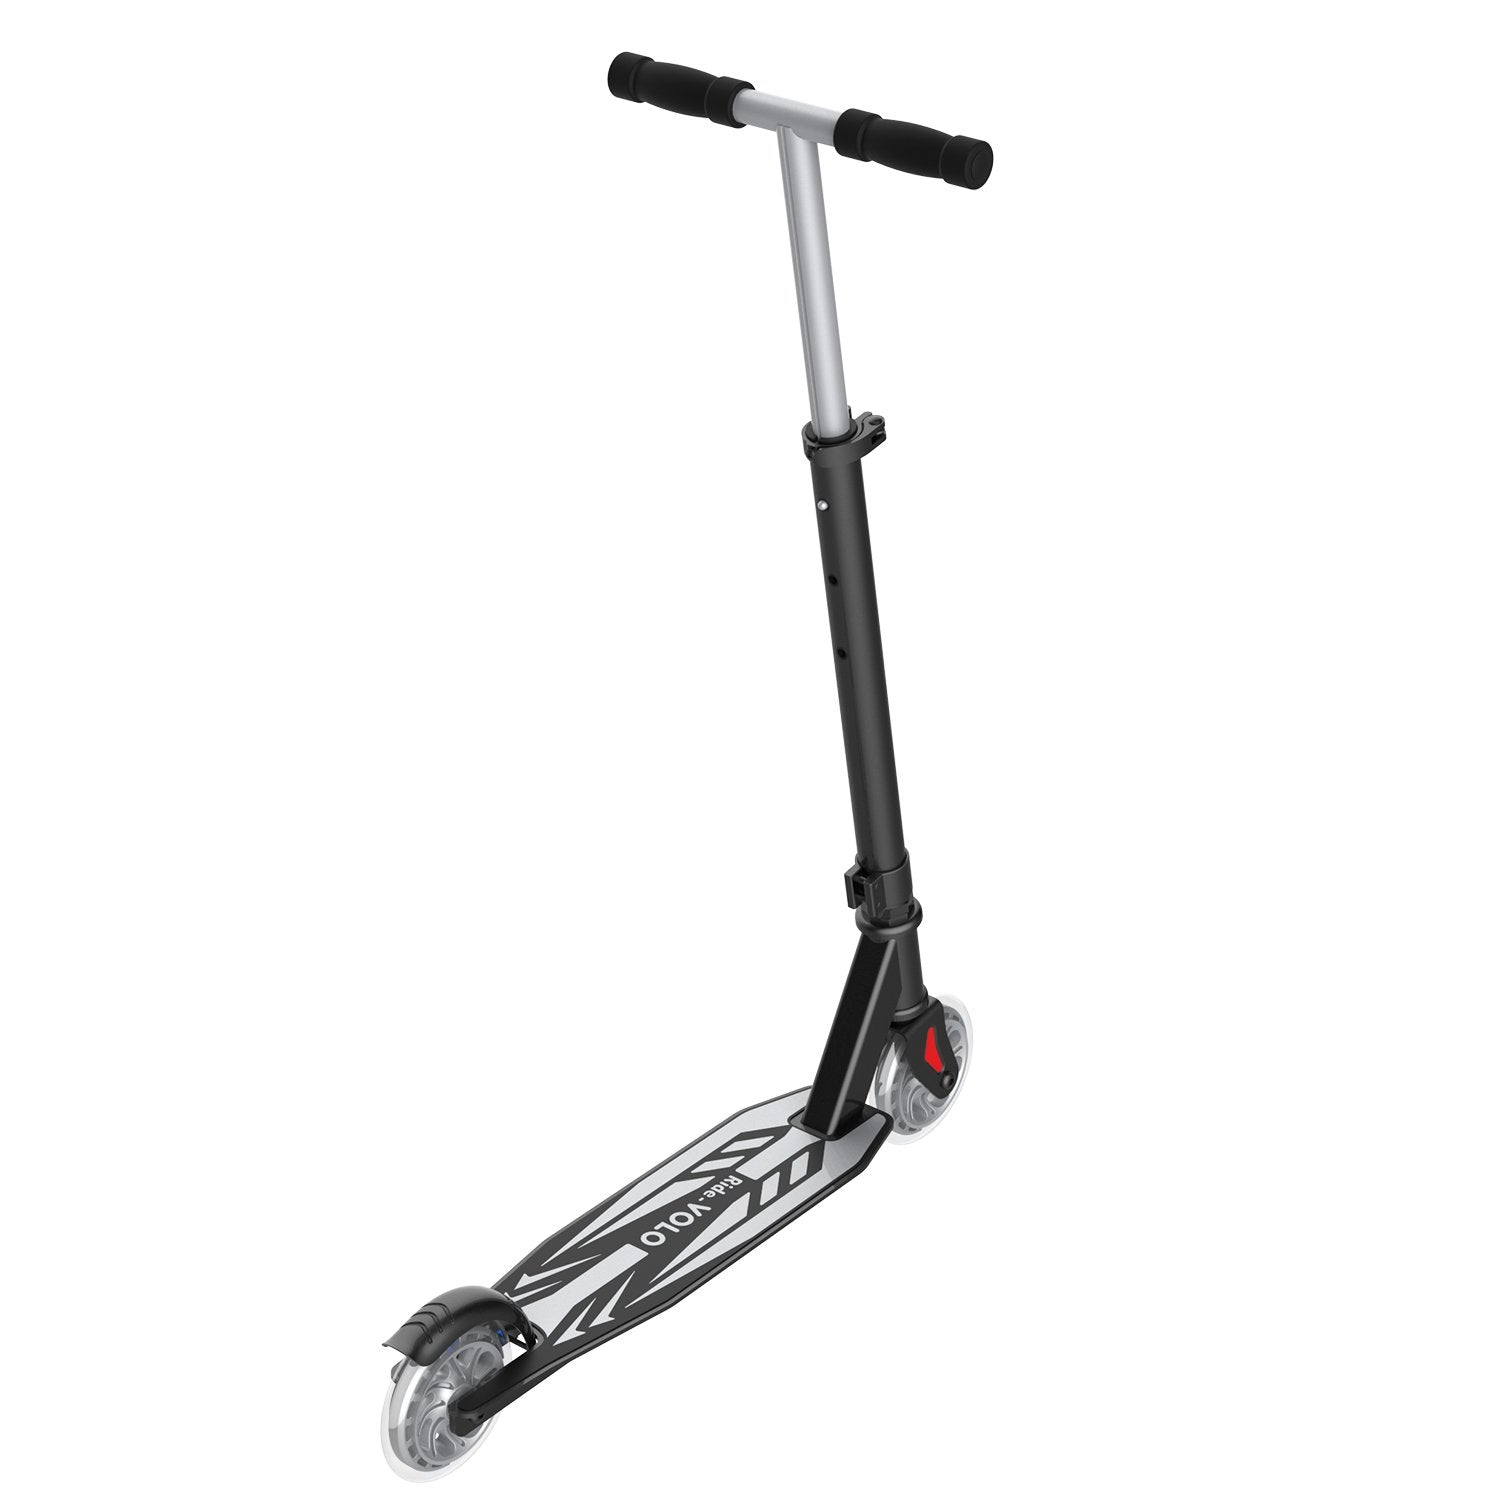 Gray k05 scooter away image